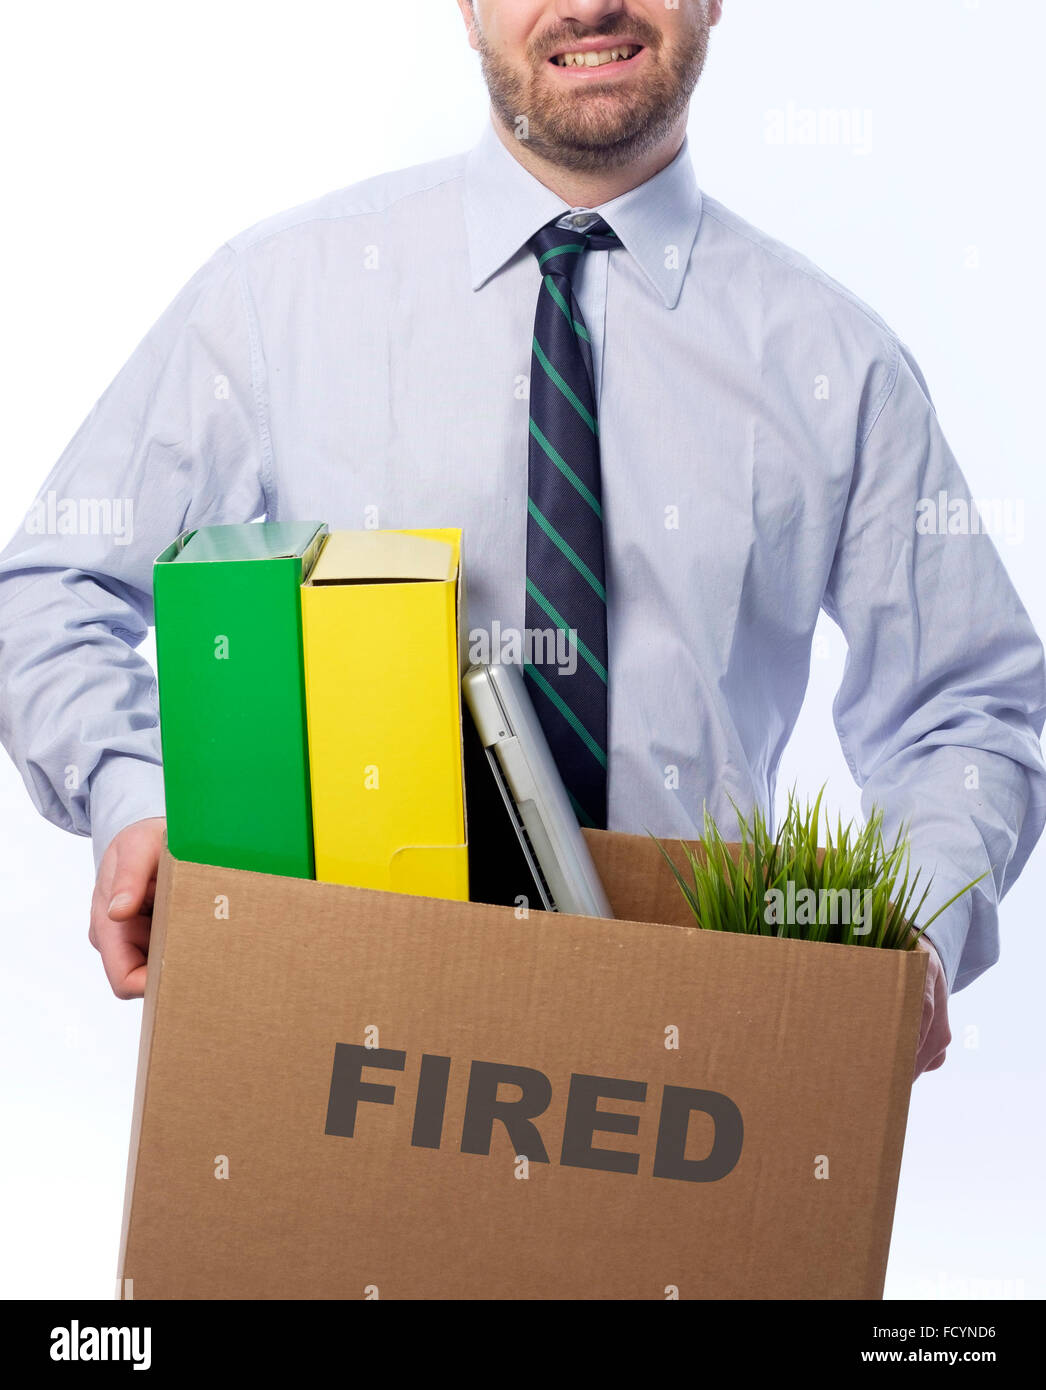 Fired businessman holding box with personal belongings isolated on white background. Stock Photo